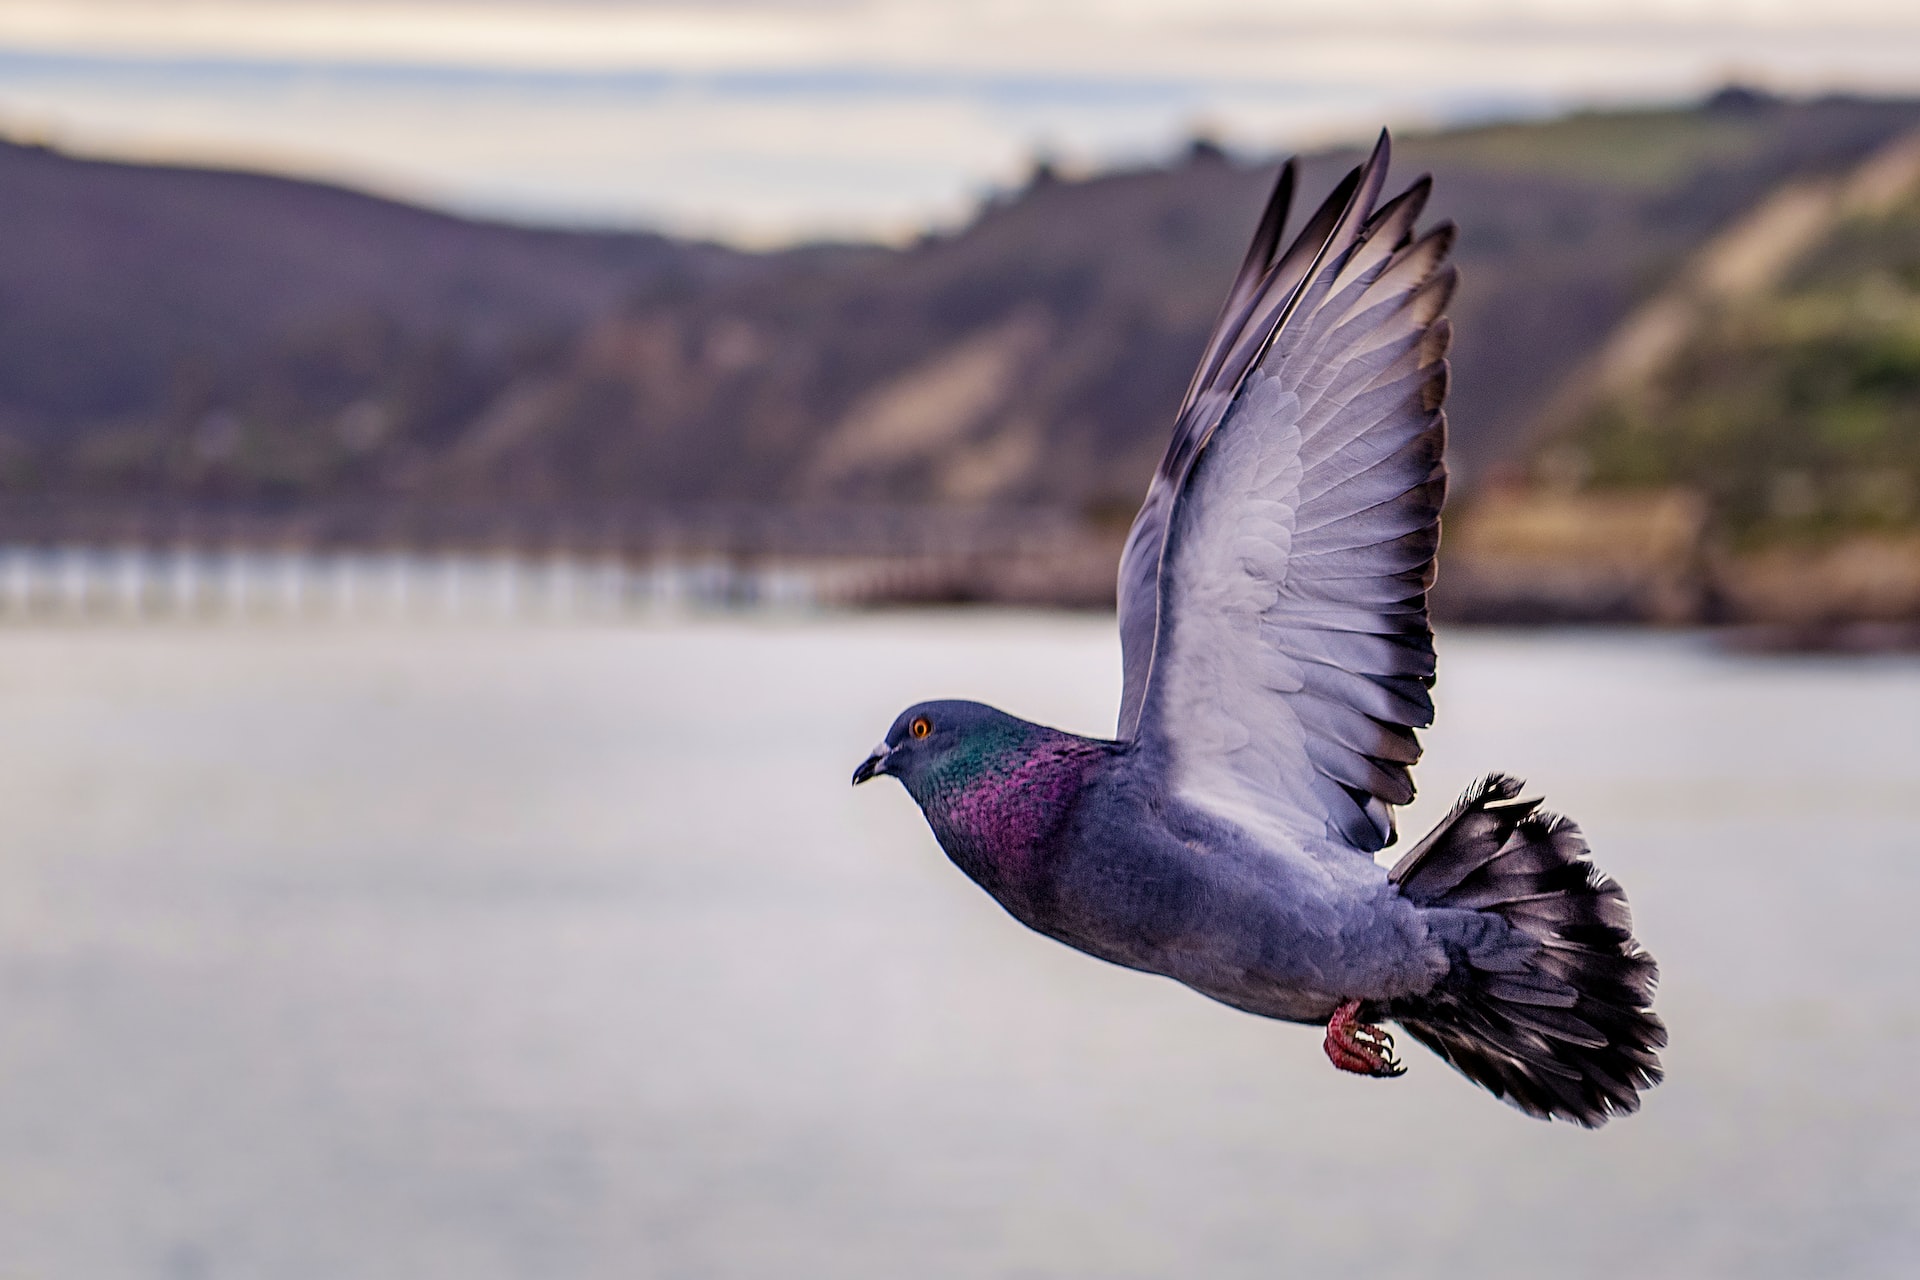 Keep Your Presentation Simple: How a Pigeon Hijacked My Talk